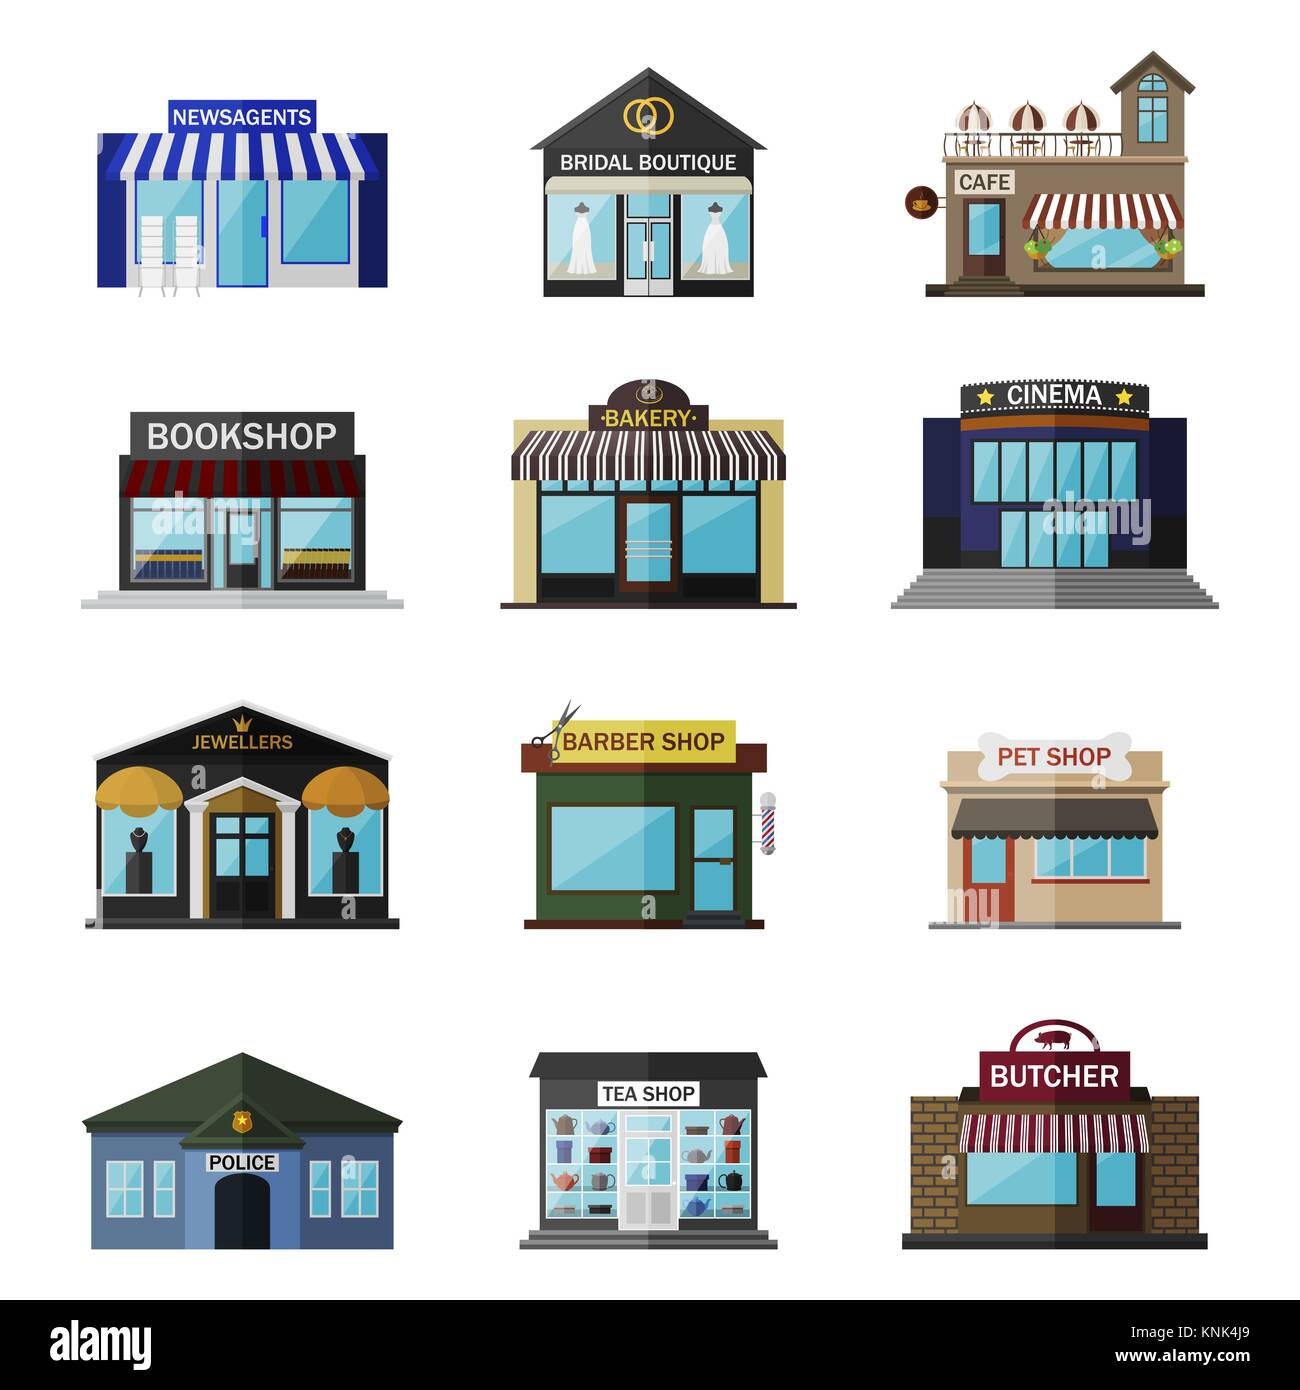 Different shops, buildings and stores flat icon set isolated on white. Includes newsagents, bridal boutique, cafe, bookshop, bakery, cinema, jewellers, barber shop, pet shop, police, tea shop, butcher Stock Vector